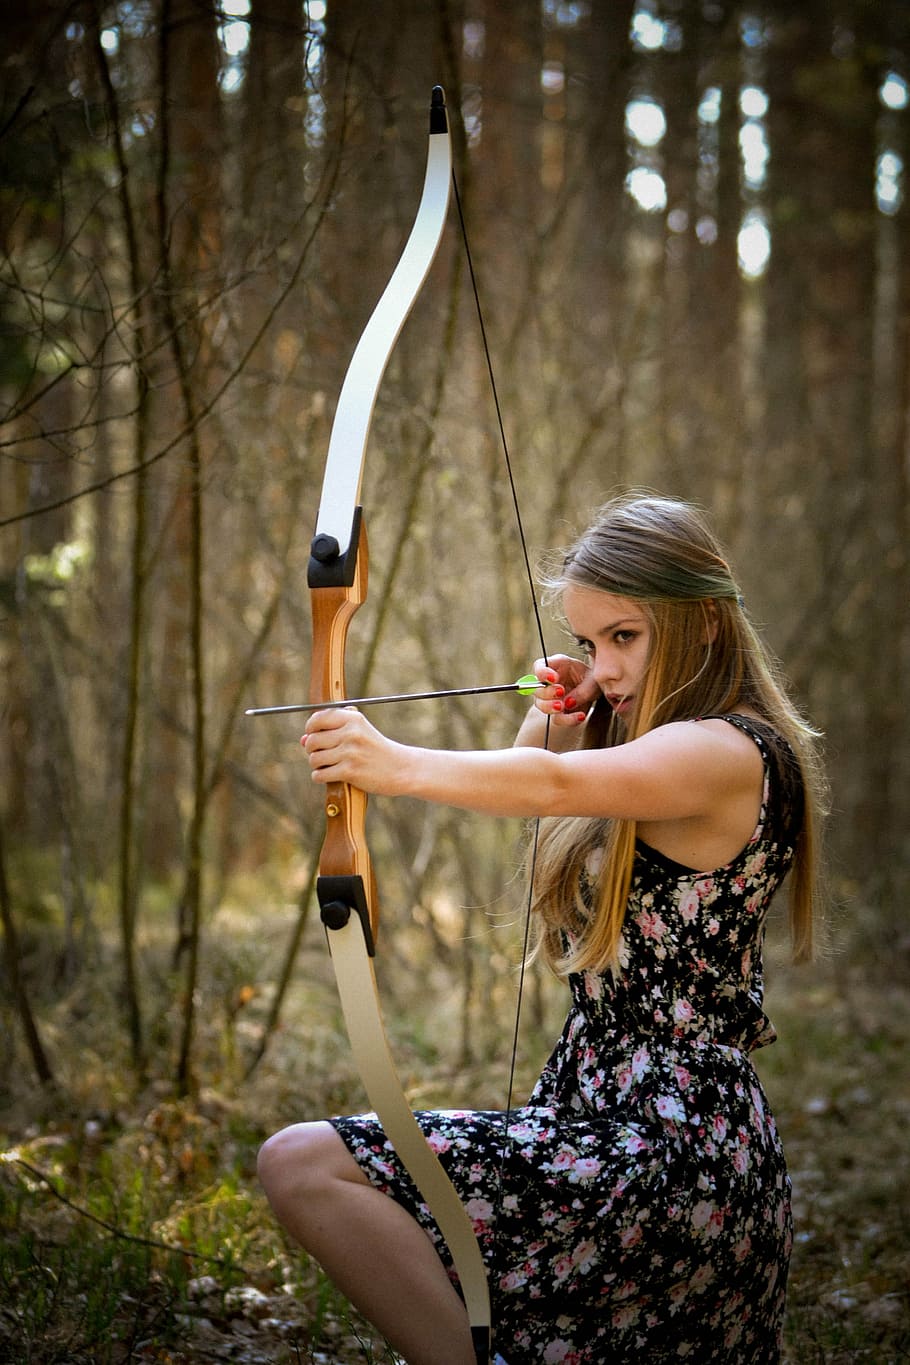 woman in black floral dress holding bow and arrow kneeling in forest, HD wallpaper